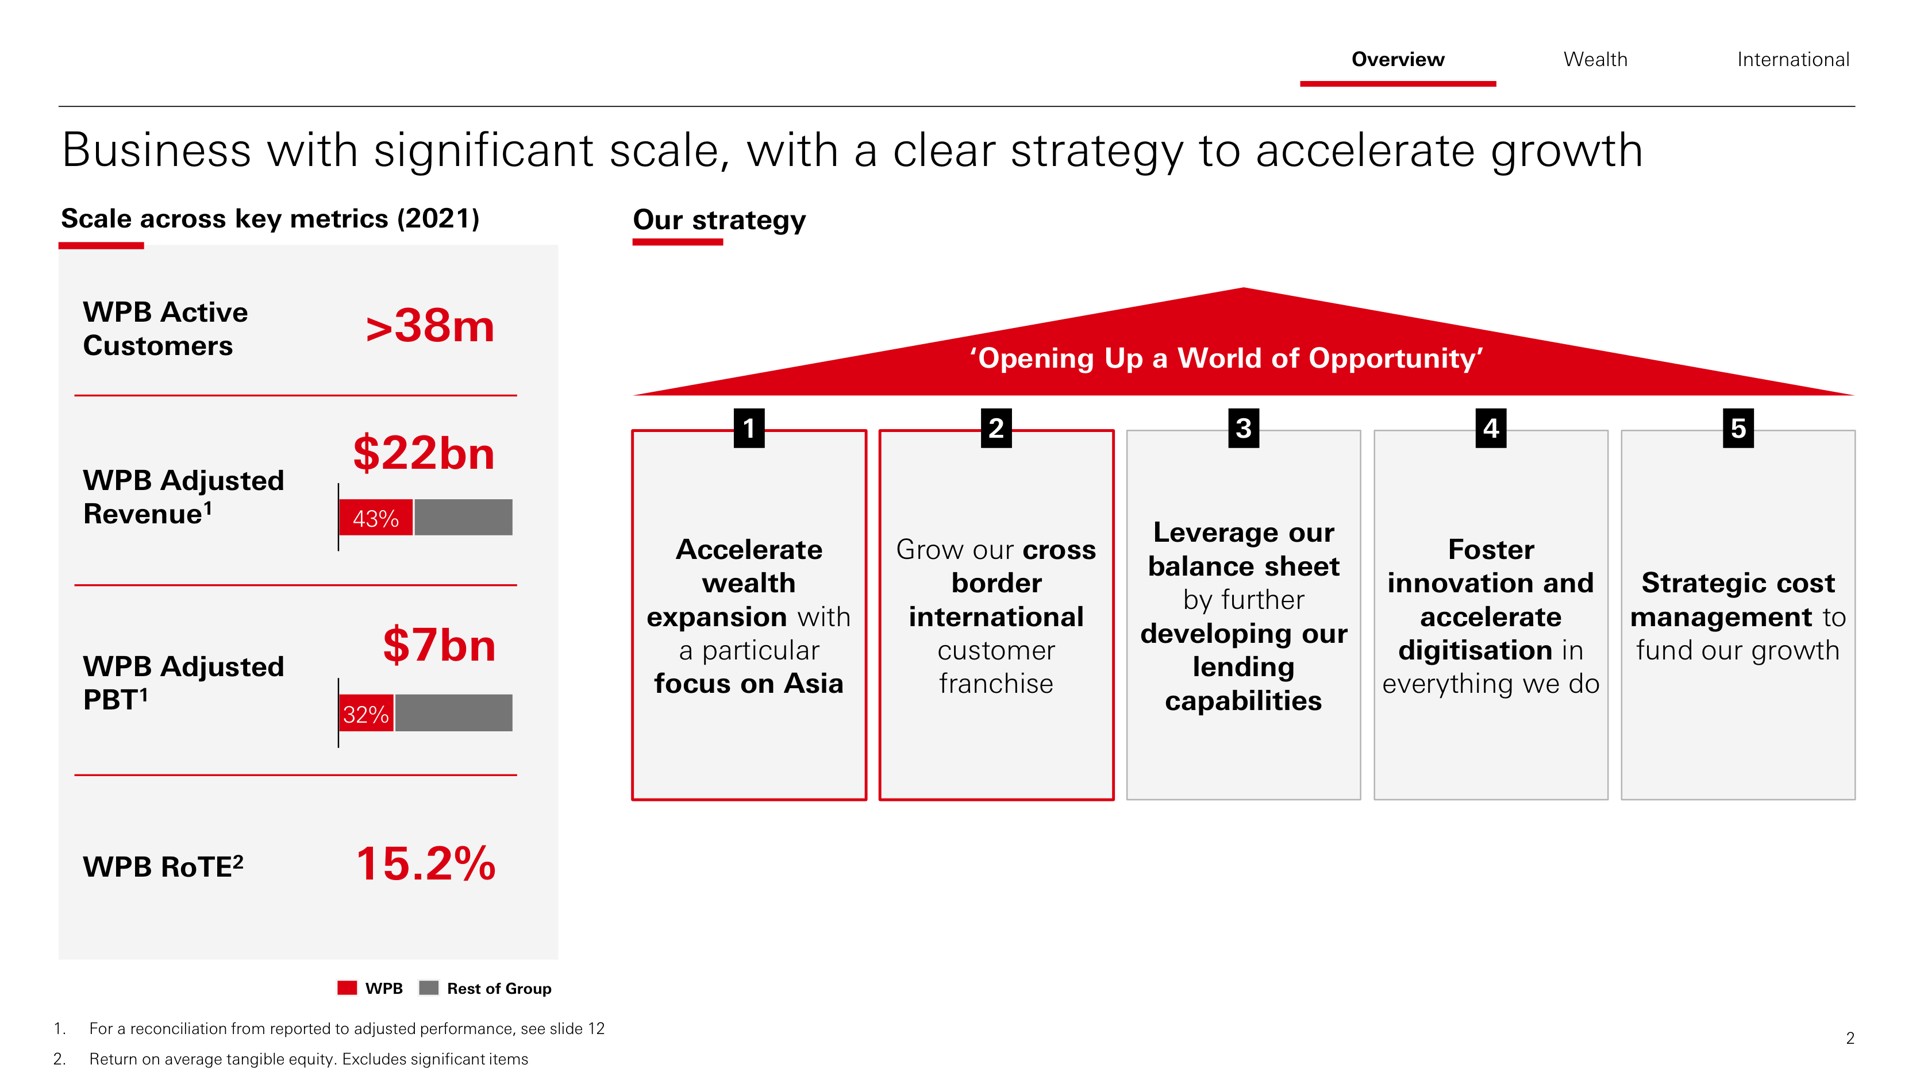 business with significant scale with a clear strategy to accelerate growth go so rote | HSBC